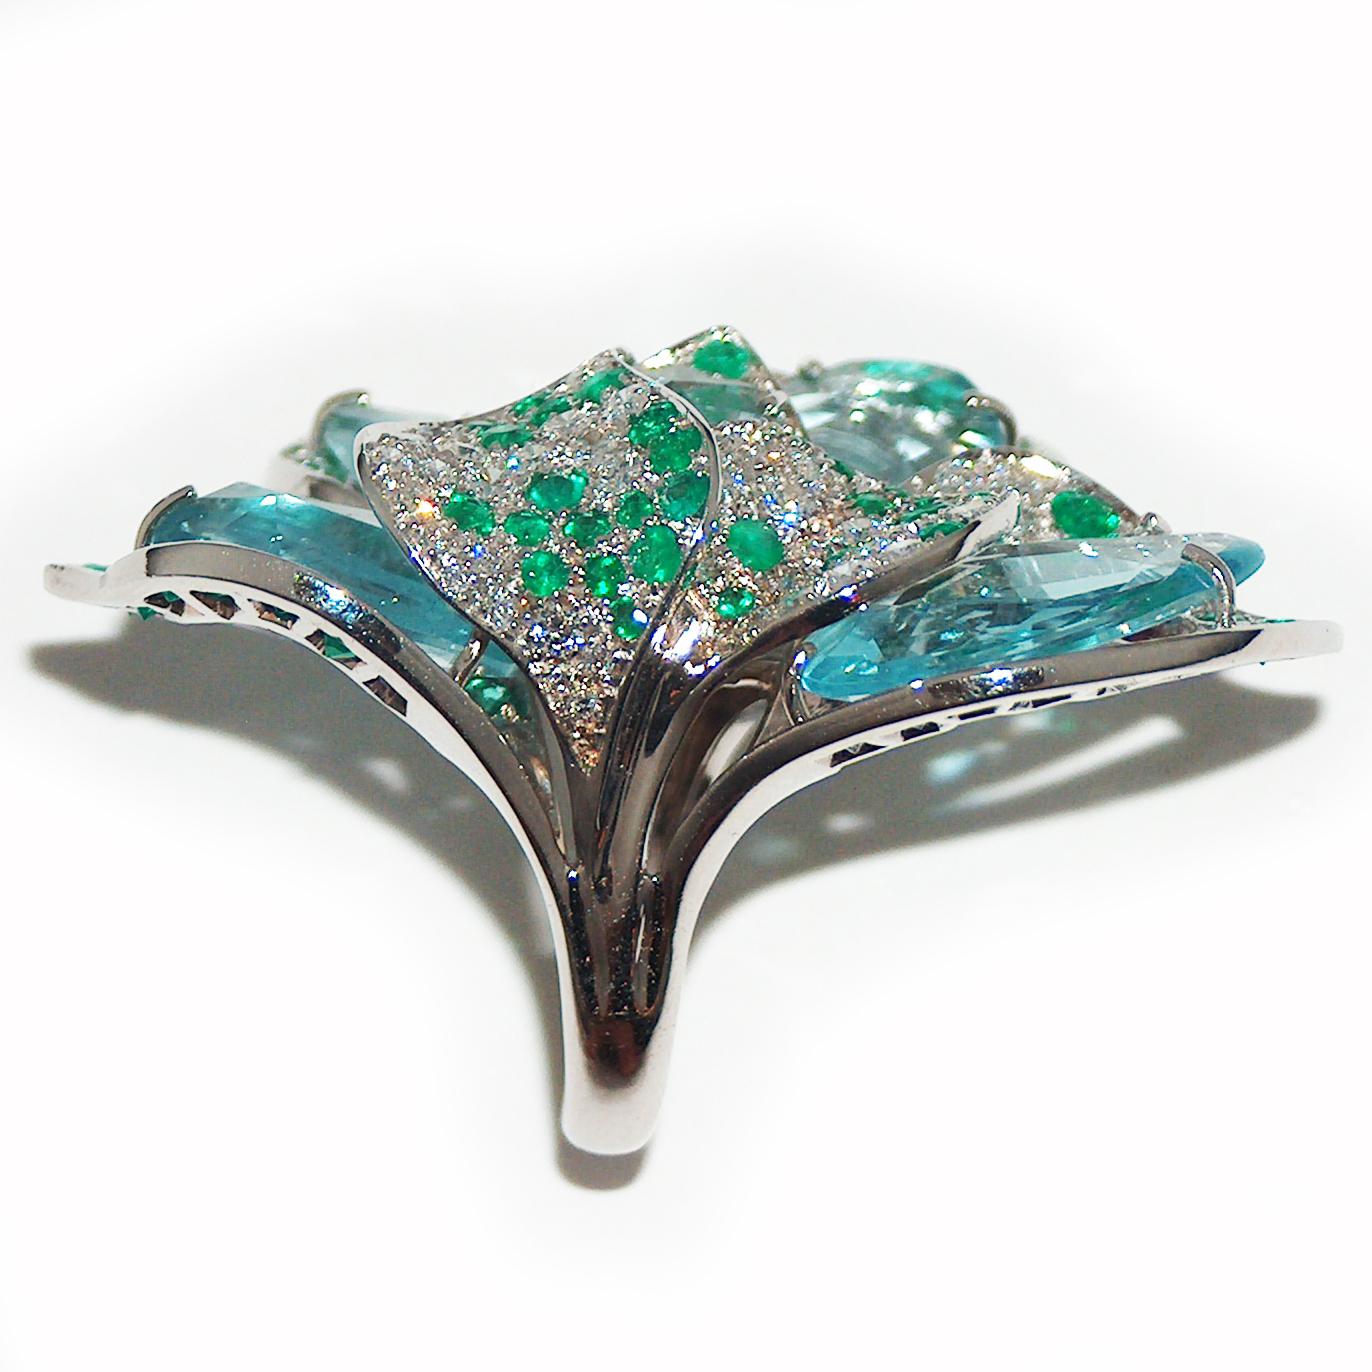 Paolo Piovan White Diamonds, Emeralds and Aquamarine 18 Karat Gold Flower Ring In New Condition For Sale In Padova, Padova